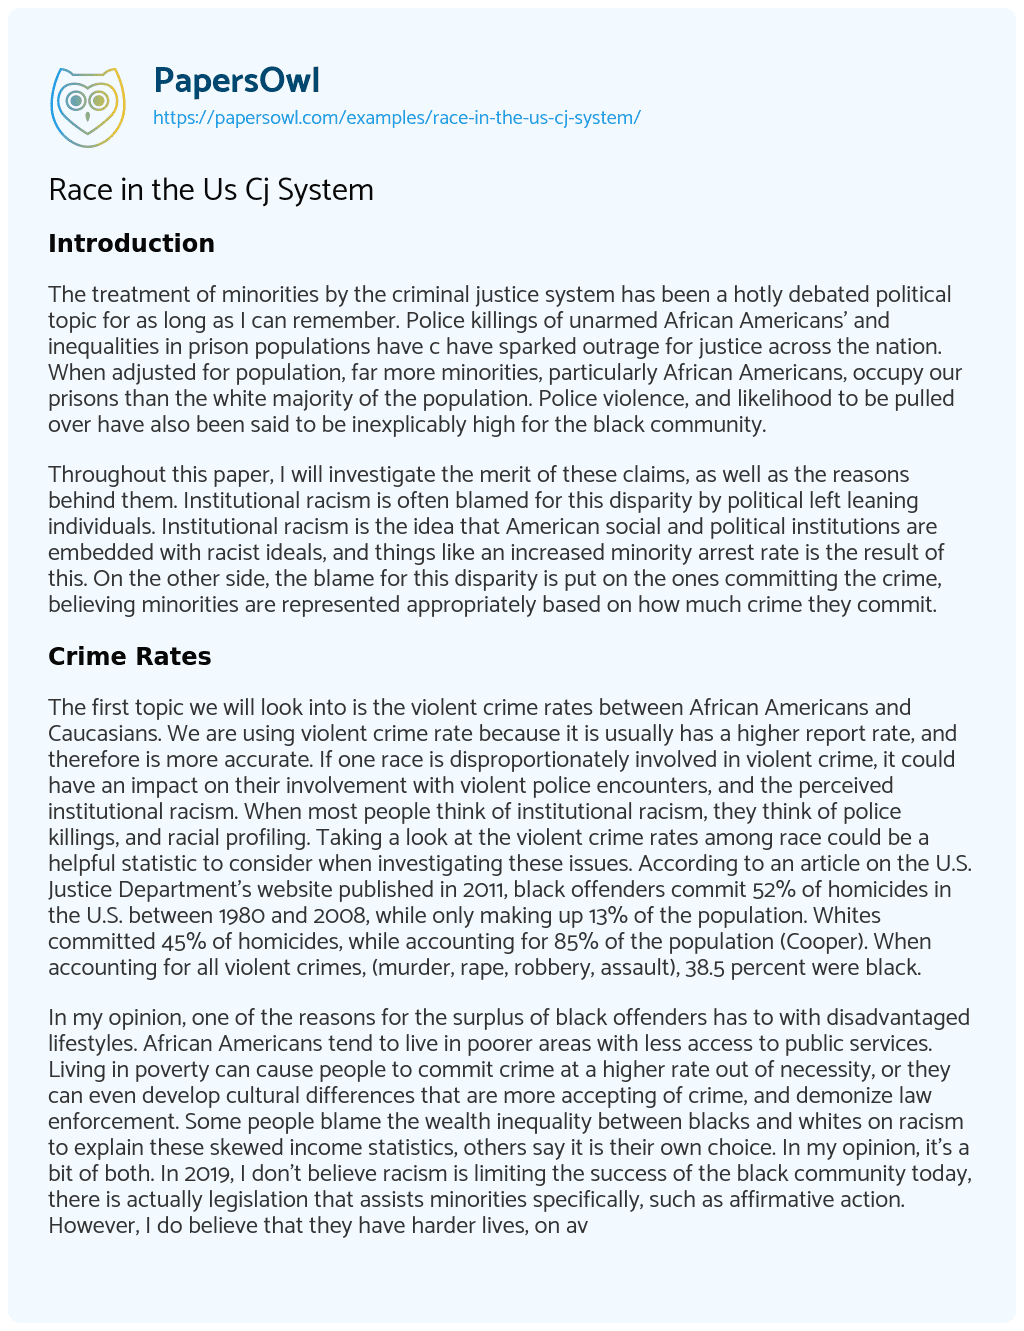 Essay on Race in the Us Cj System